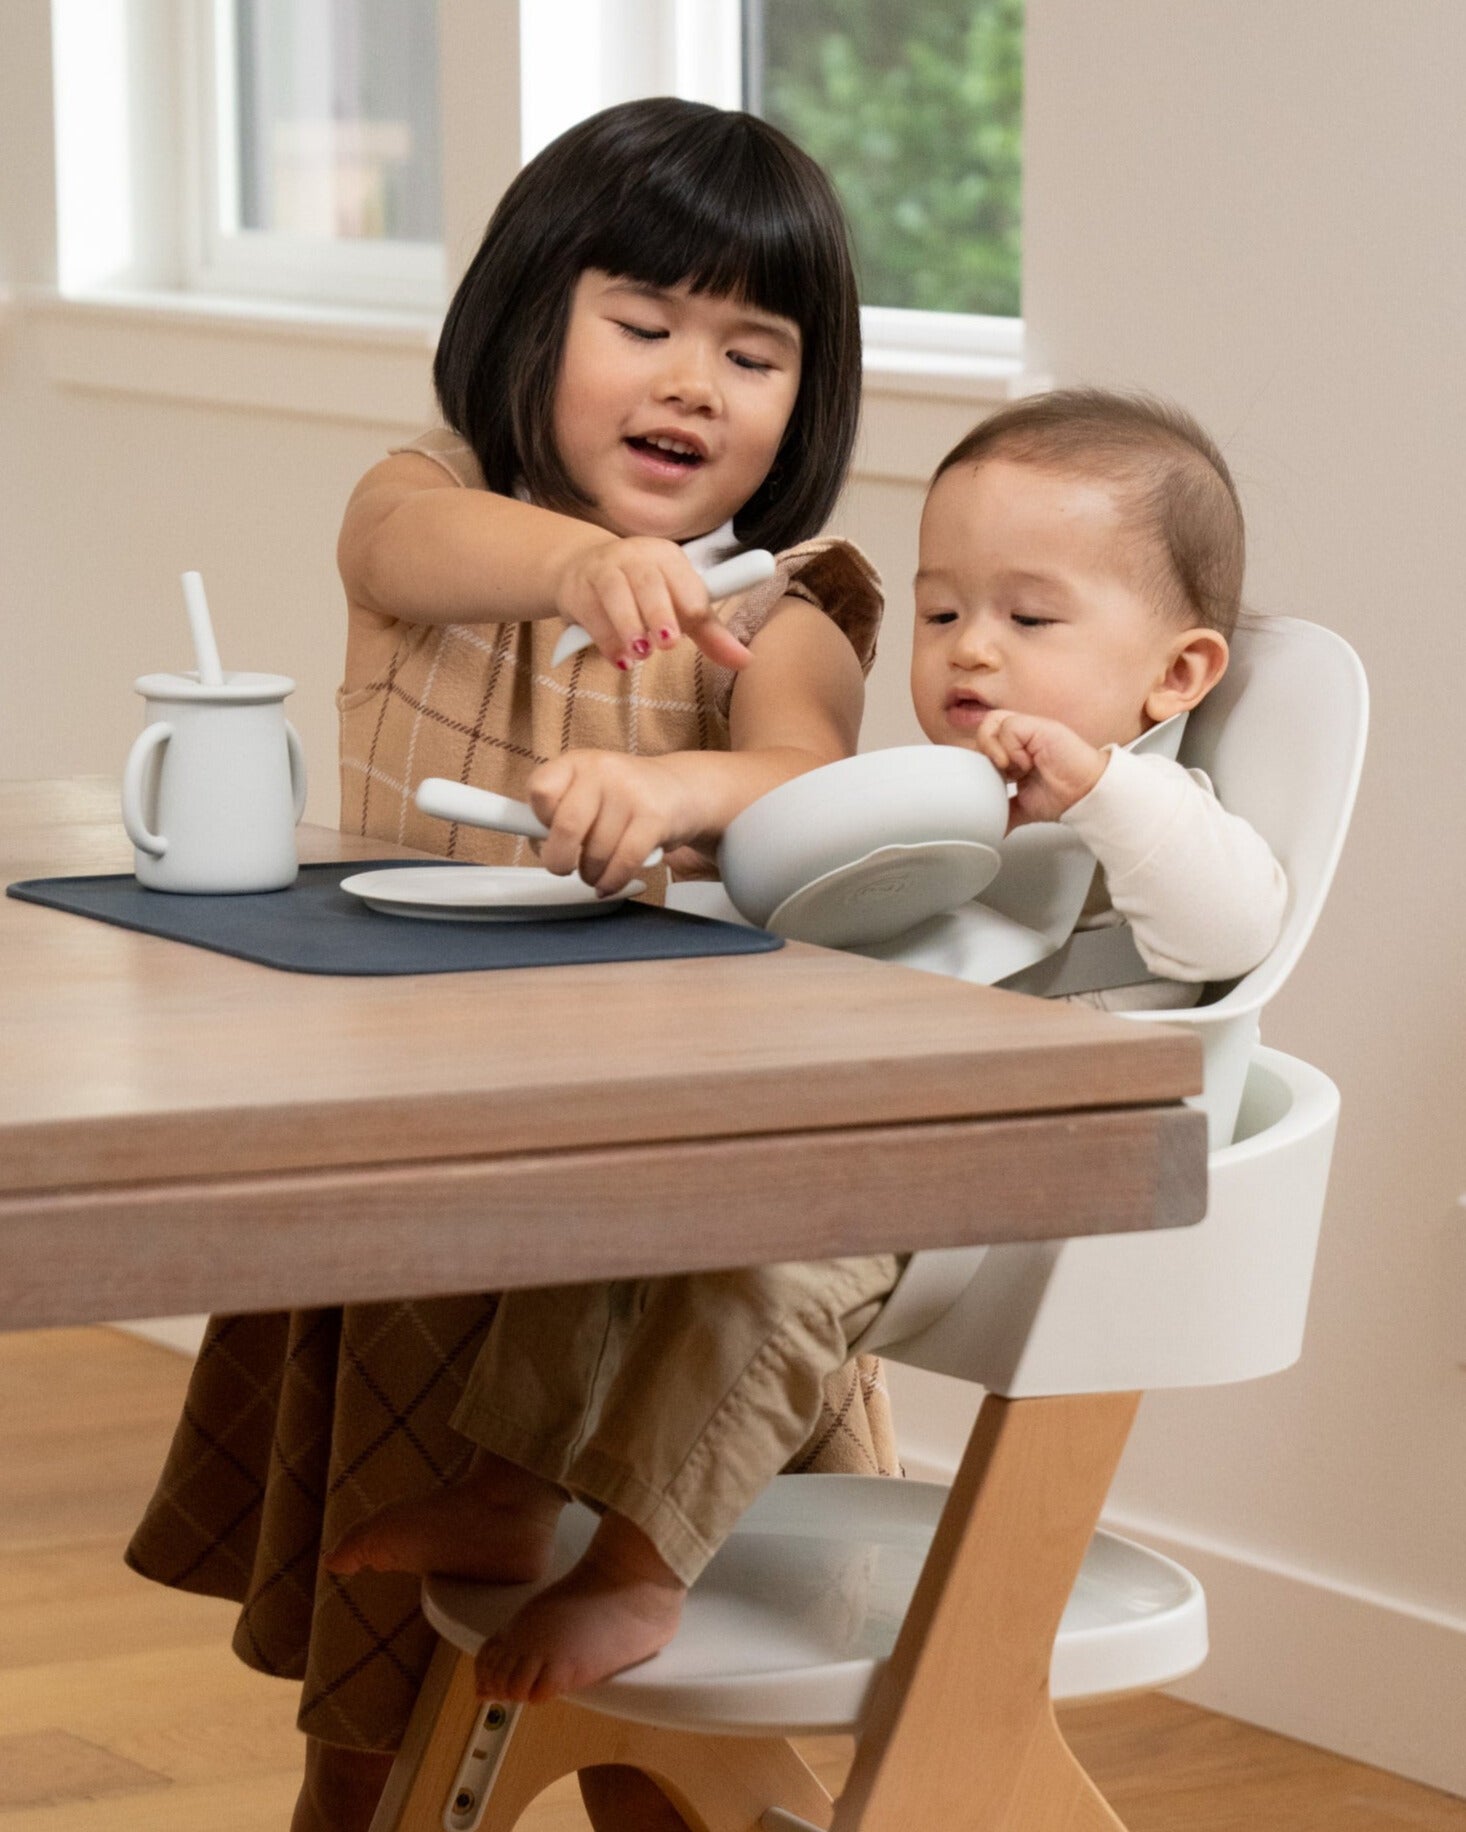 Older child and smaller child at the kitchen table enjoying a meal. The older child is using the Mockingbird dishware to feed her little brother who is sitting in the Mockingbird High Chair